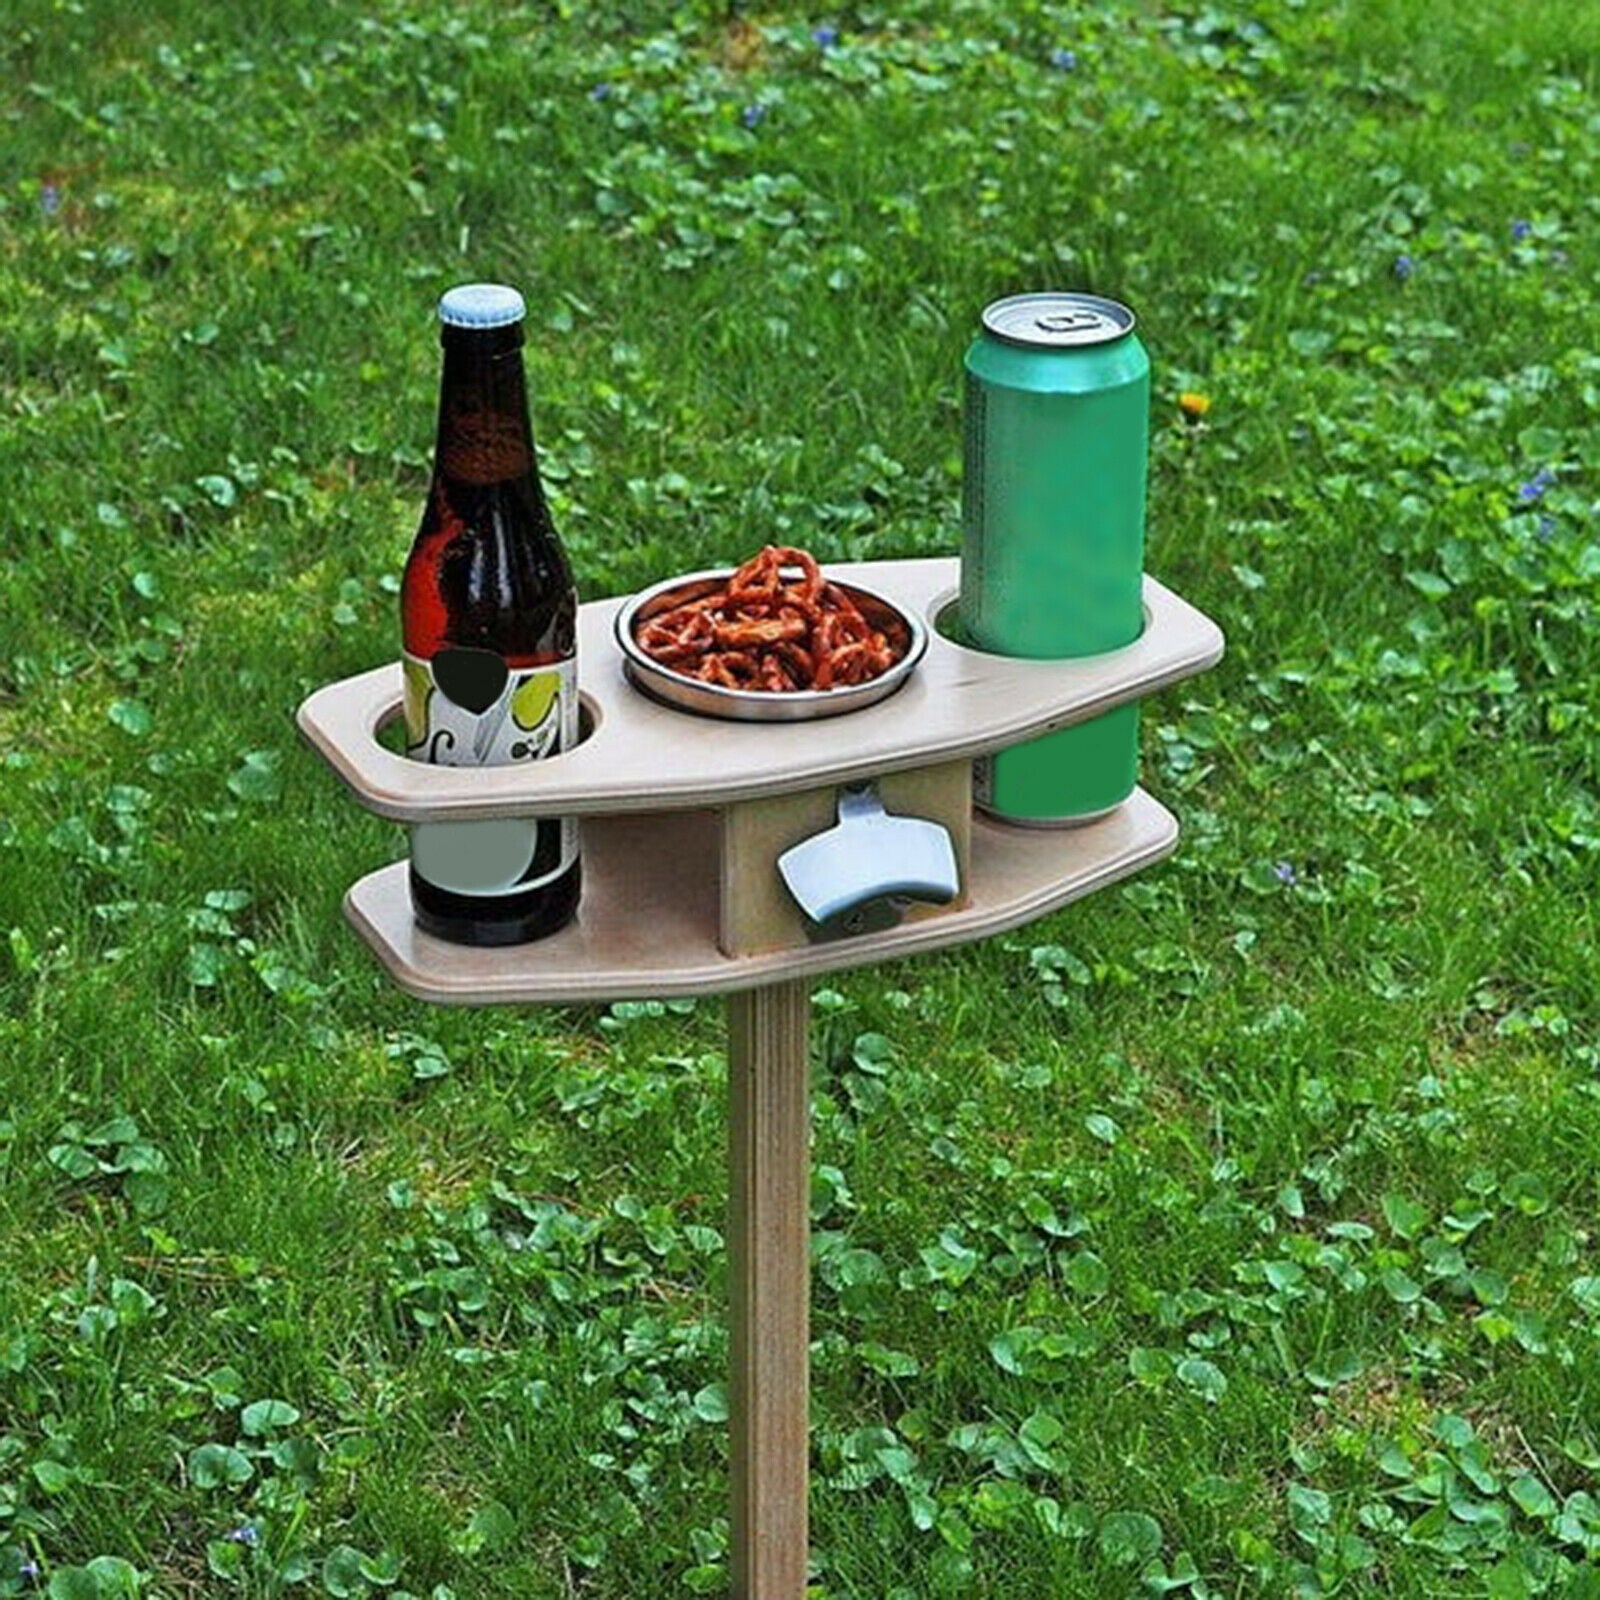 Wooden Wine Table Garden Lawn BBQ Beach Party Camping Trip Bottles Rack